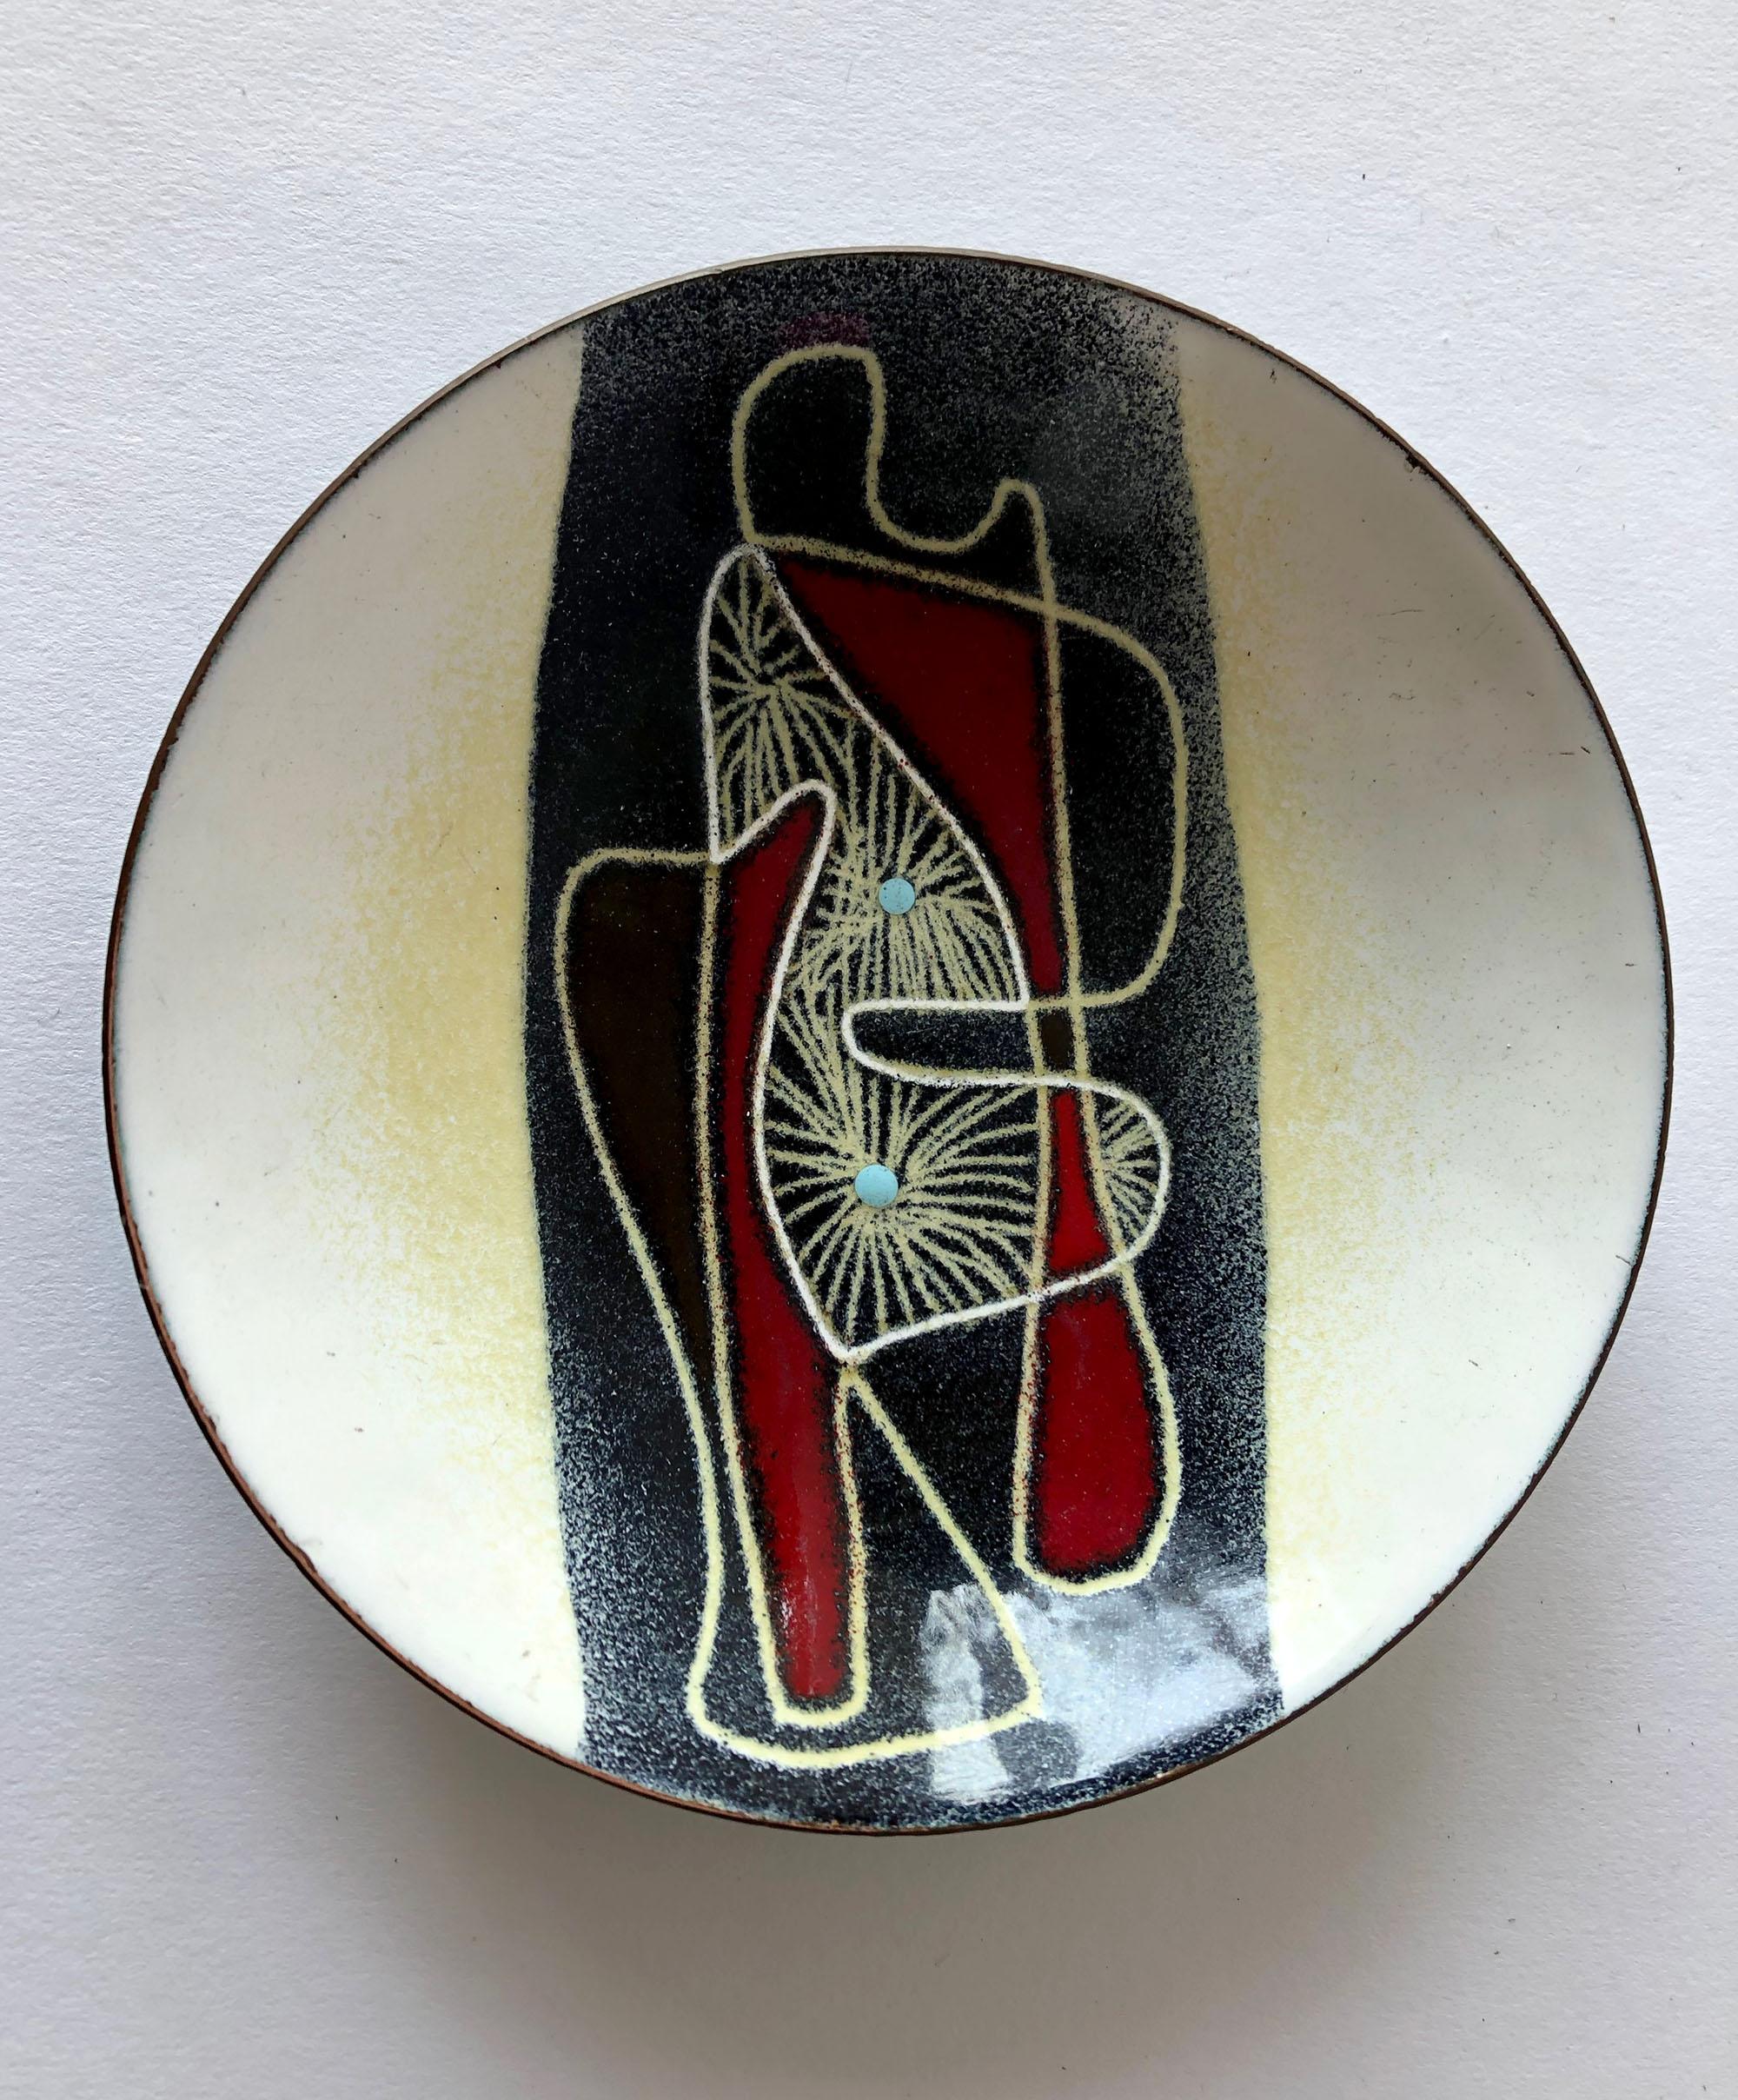 Early 1950s enamel dish/shallow bowl created by Jackson and Ellamarie Woolley of San Diego, California. Bowl measures 5